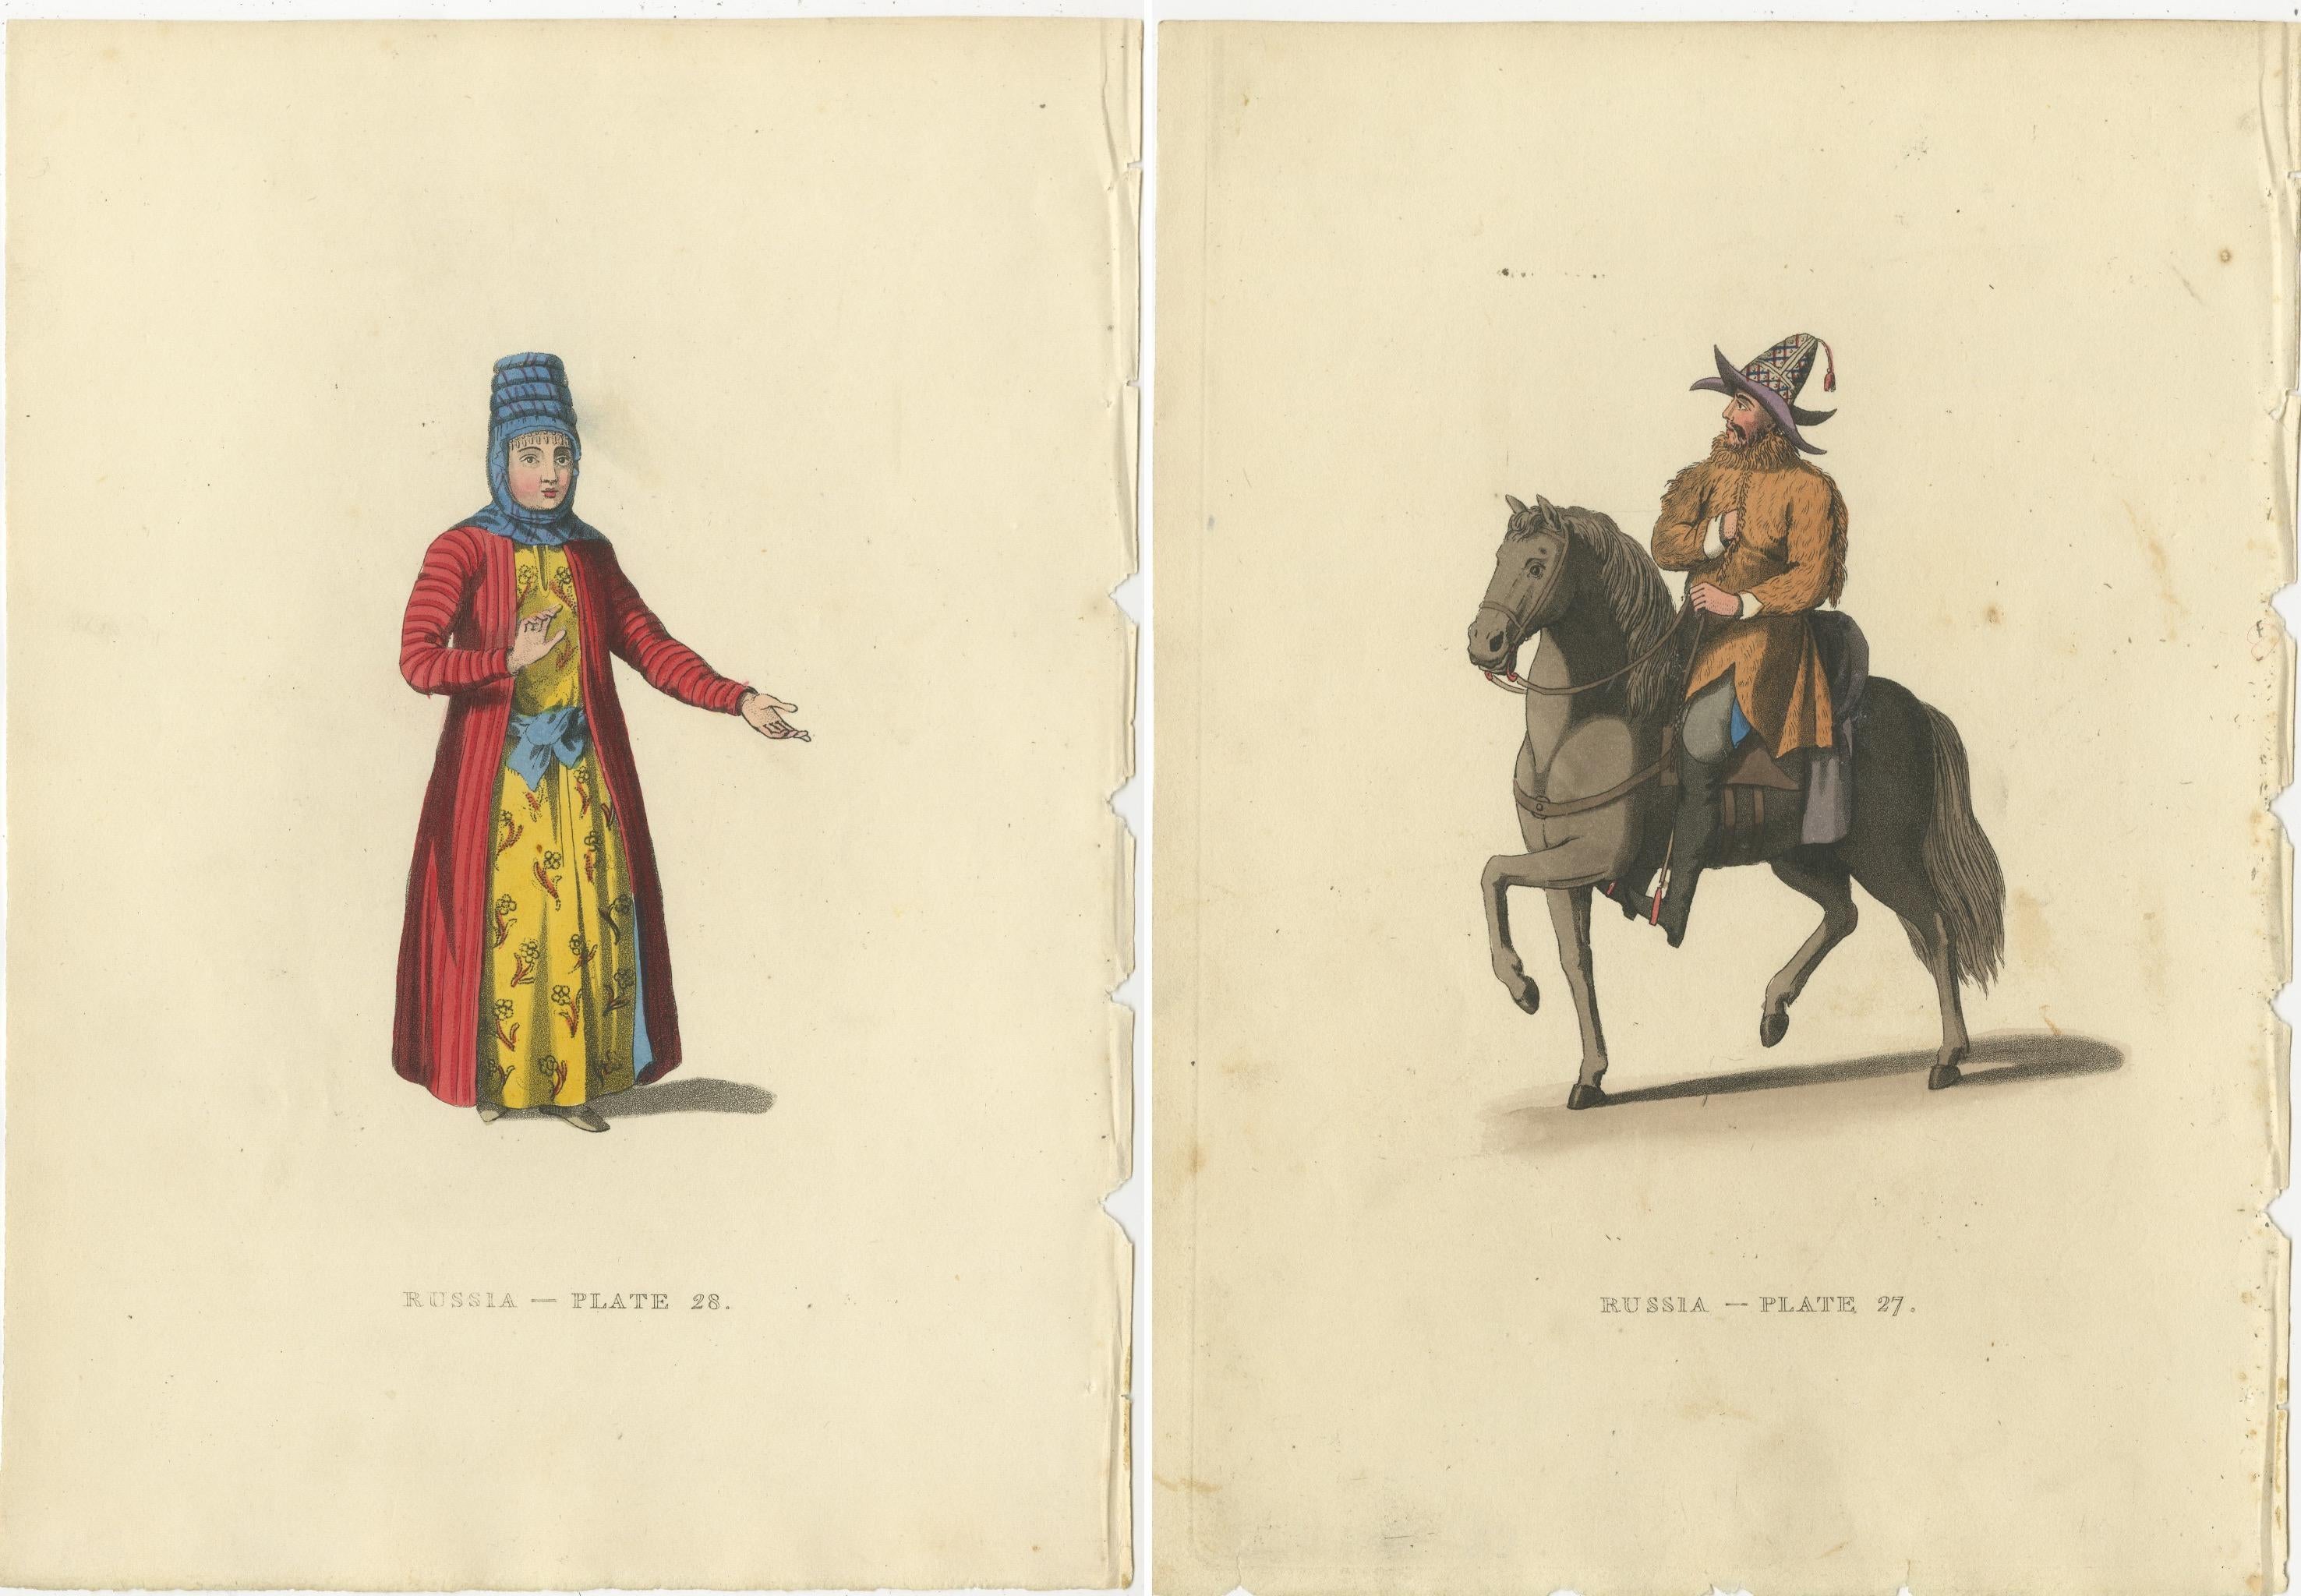 The two engravings vividly capture the traditional attire of the Kirghiz, a group native to the steppes of Central Asia.

1. The first engraving portrays a Kirghiz man mounted on horseback. The man is dressed in a fur-lined coat, reflecting the need